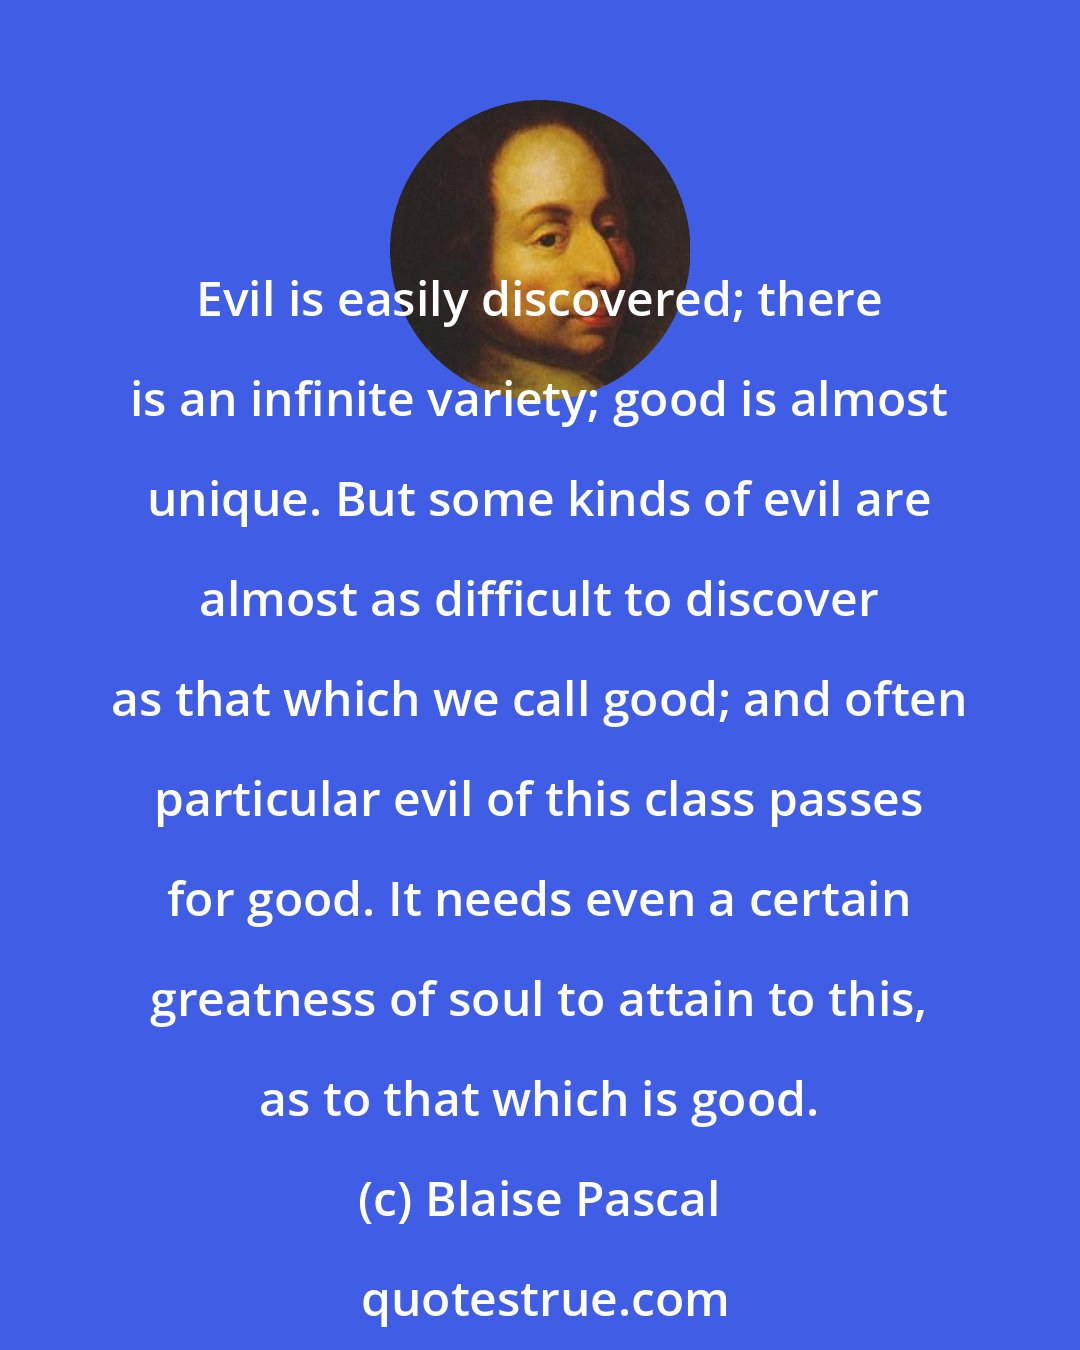 Blaise Pascal: Evil is easily discovered; there is an infinite variety; good is almost unique. But some kinds of evil are almost as difficult to discover as that which we call good; and often particular evil of this class passes for good. It needs even a certain greatness of soul to attain to this, as to that which is good.